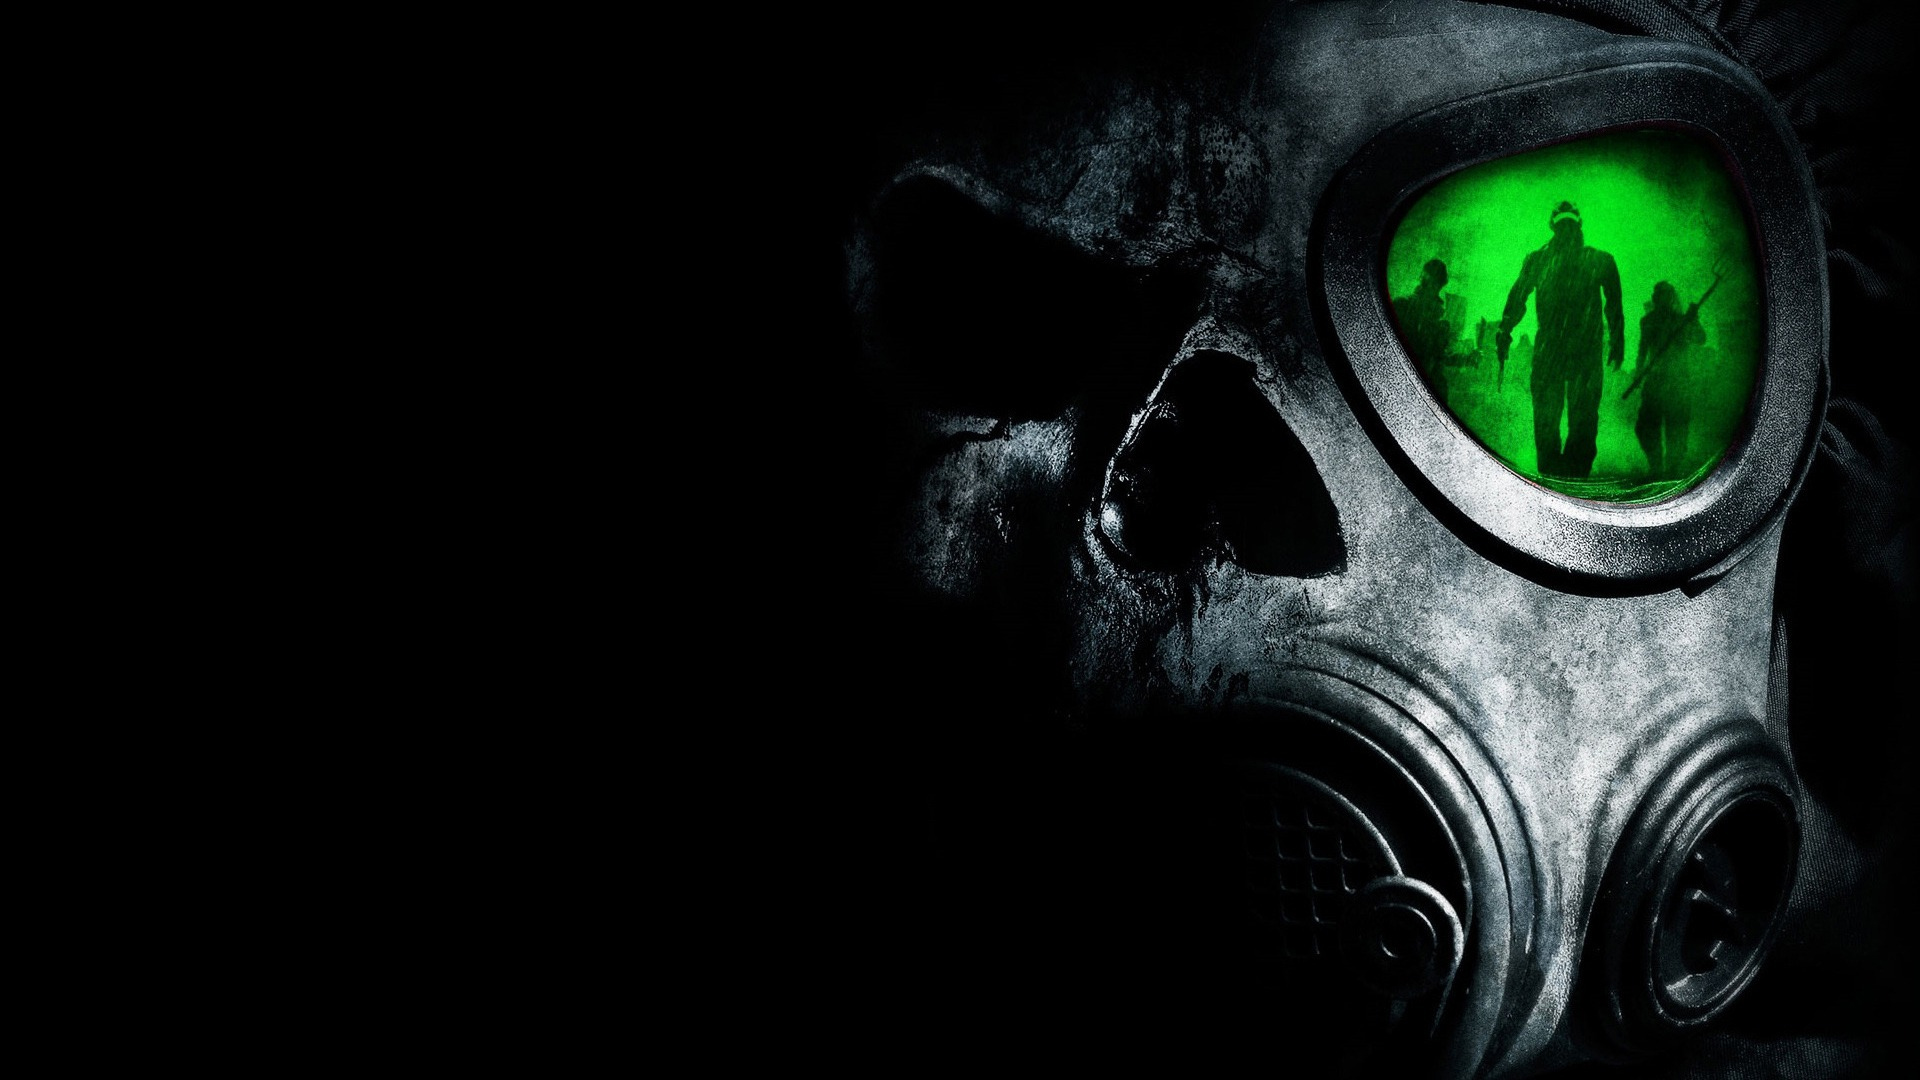 Skull Gas Mask HD Wallpaper From Top Windows Themes